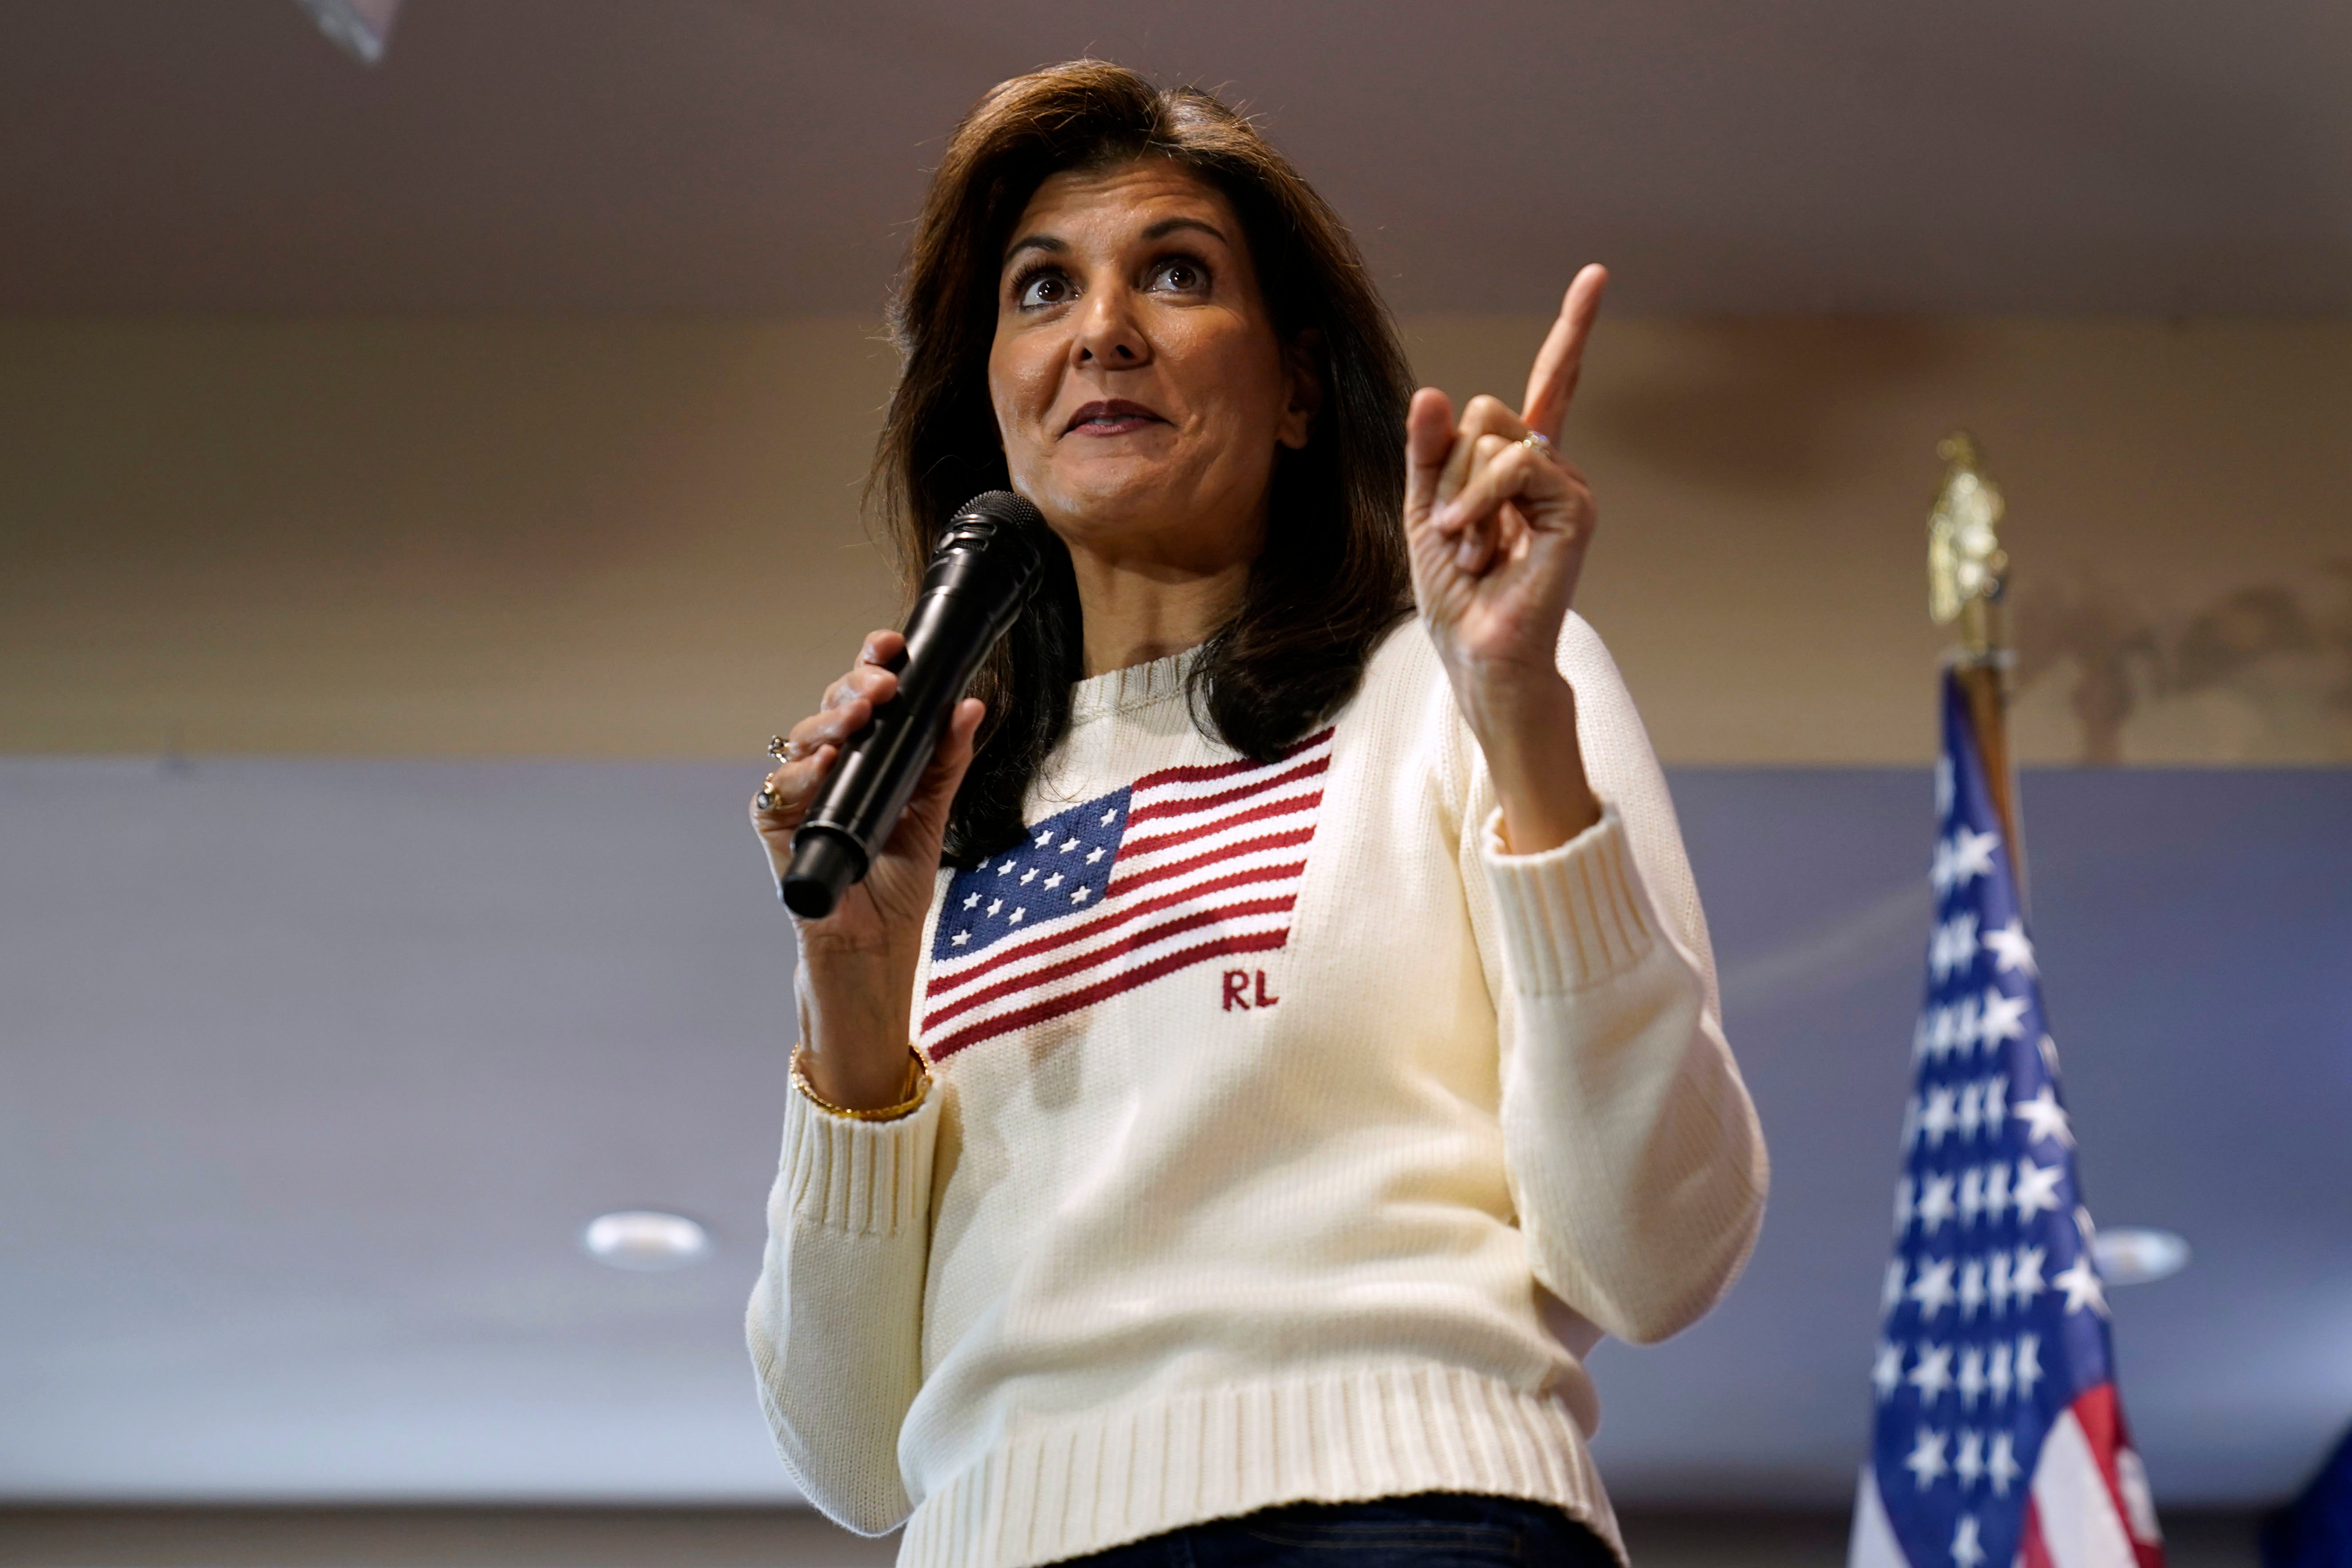 Republican presidential candidate Nikki Haley speaks during a town hall in Iowa on 18 December